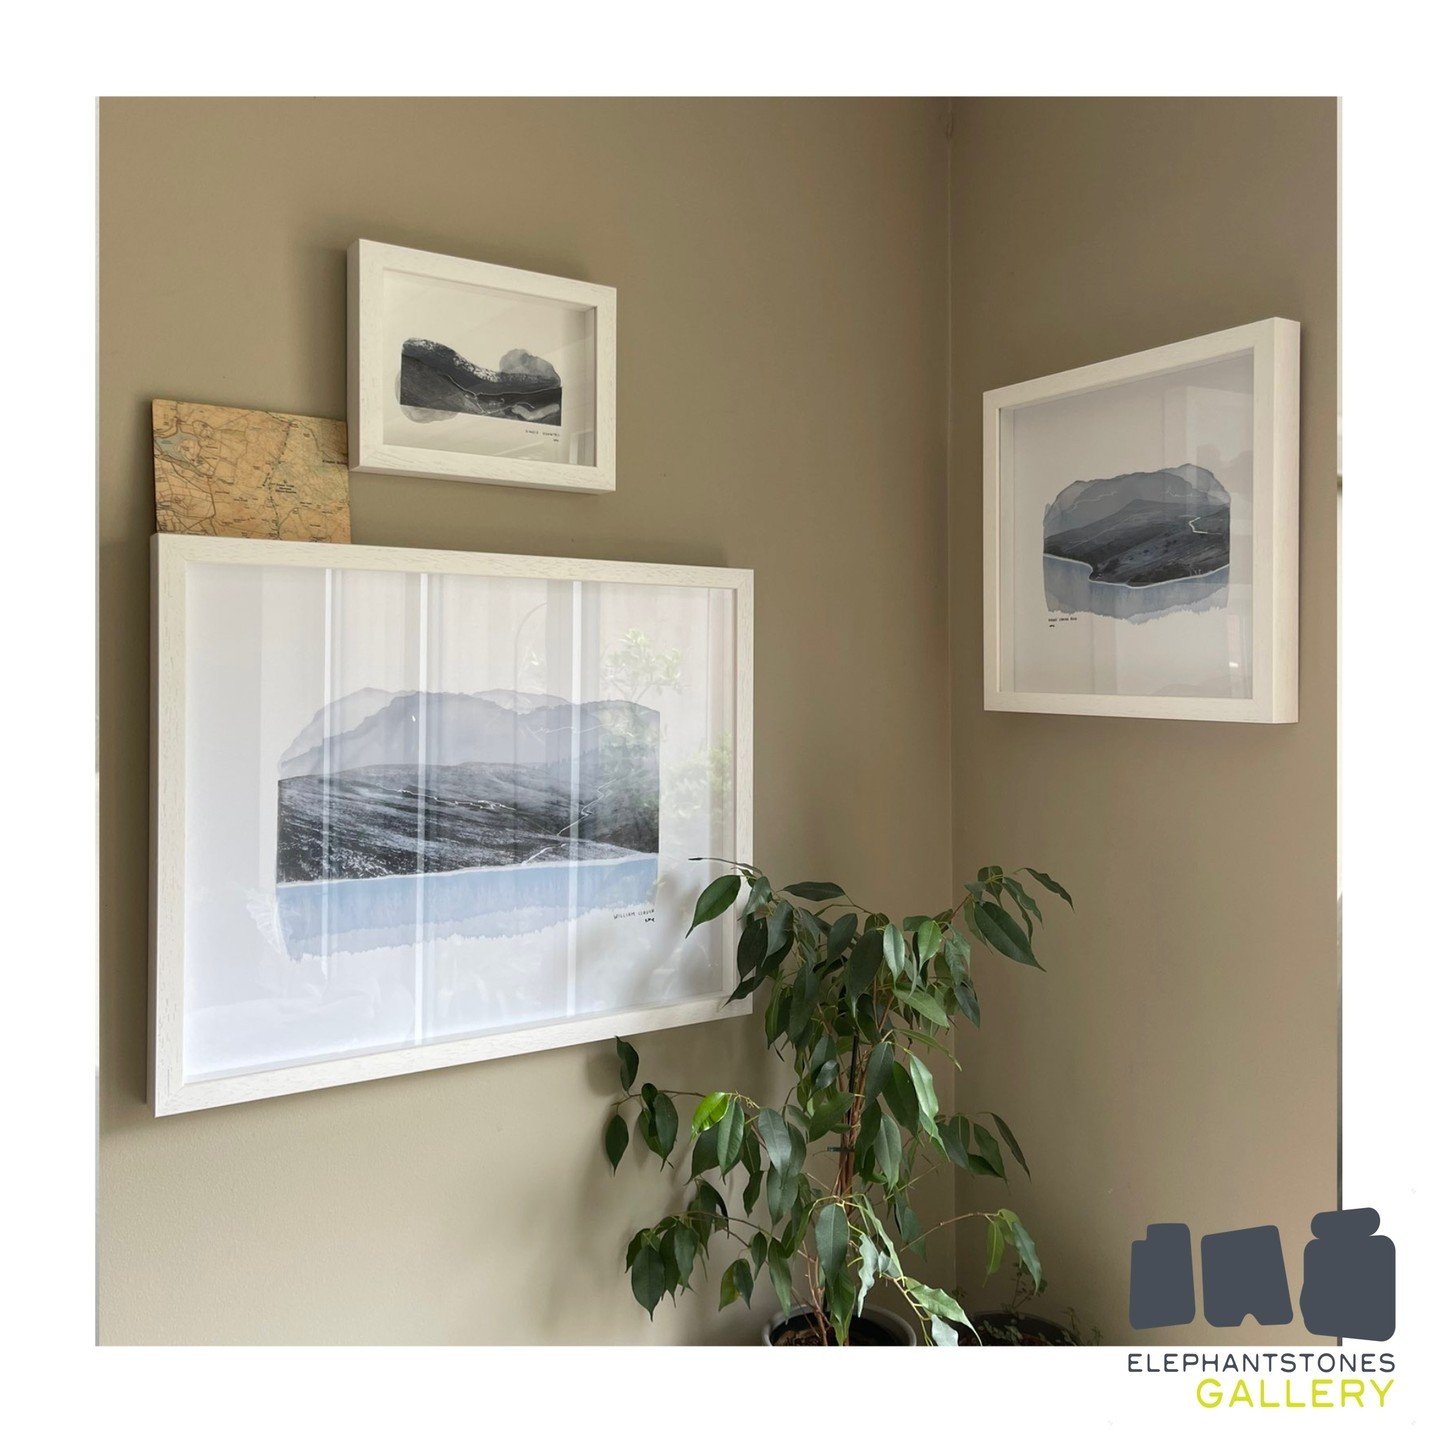 We are always delighted to see where our artworks end up. This picture was shared by the &lsquo;Hikemates&rsquo; on Twitter of their Elephantstones corner. We love it and @eveillustration&rsquo;s work pops beautifully against the darker wall colour. 